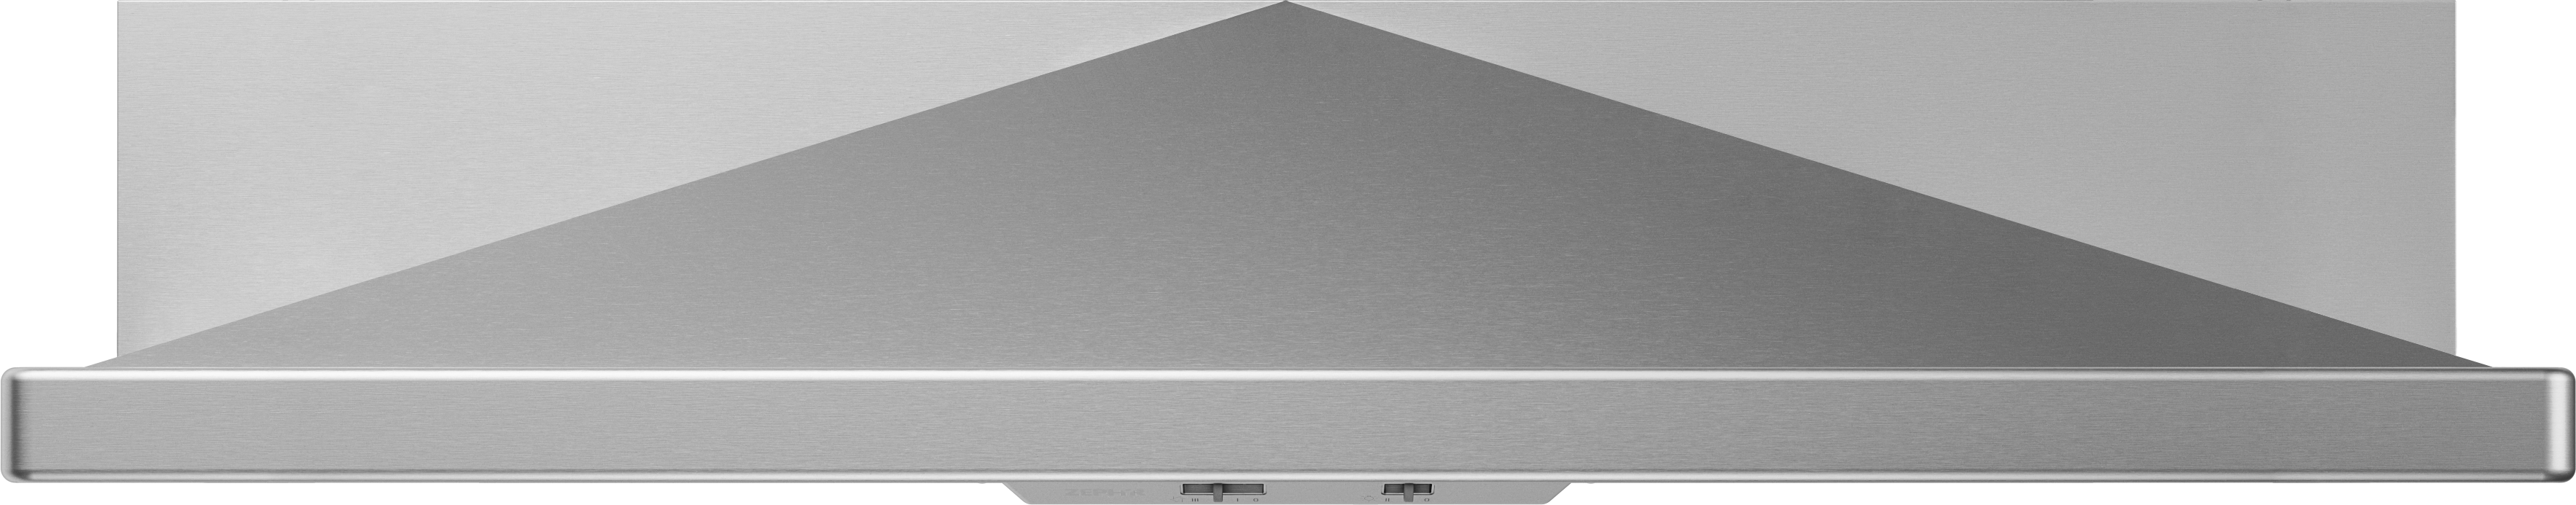 Zephyr Core Collection 36"" Under Cabinet Range Hood ZPYE36BS -  ZPY-E36BS